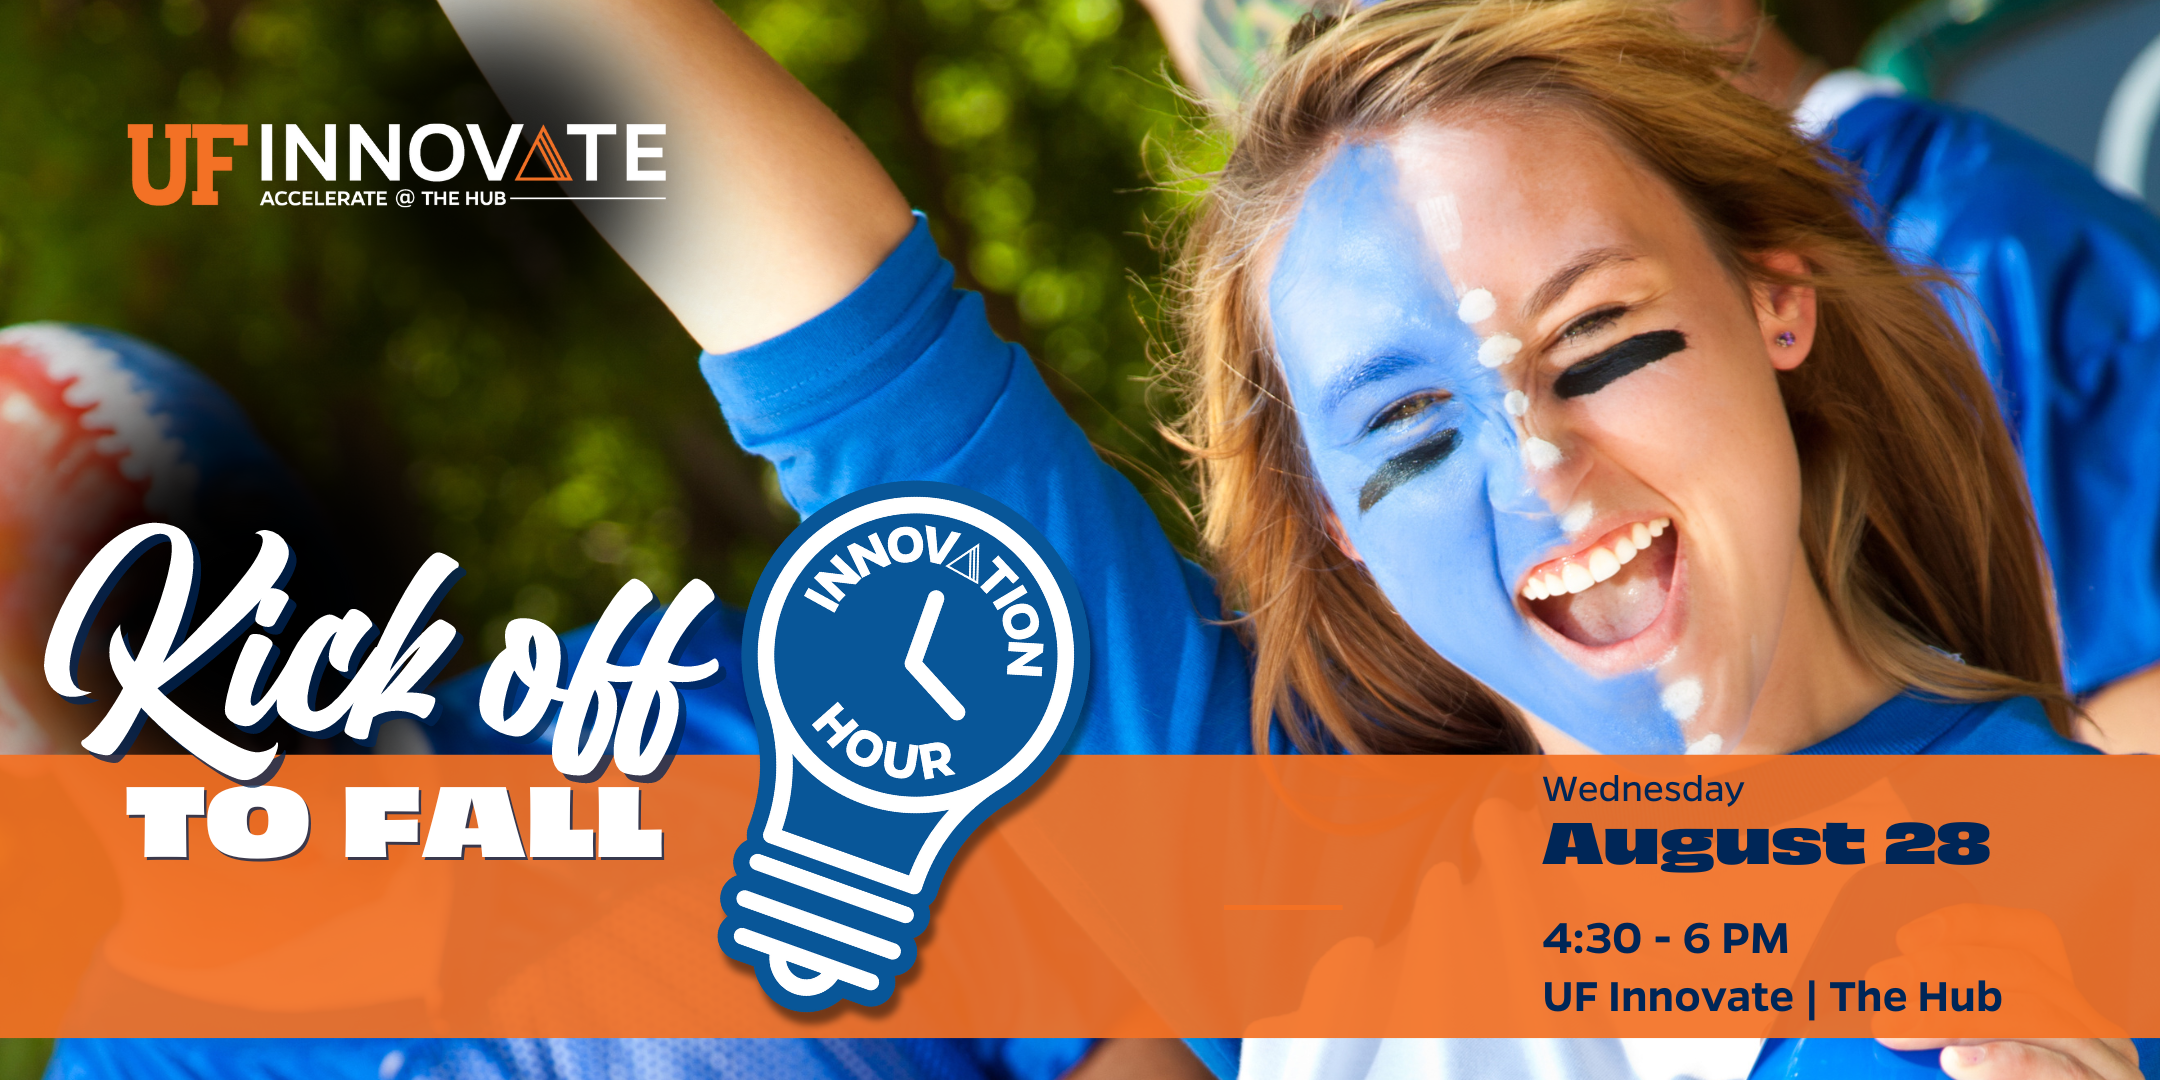 Graphic inviting entrepreneurs to the Kick Off to Fall Innovation Hour at UF Innovate | The Hub on August 27, 4:30-6 p.m.